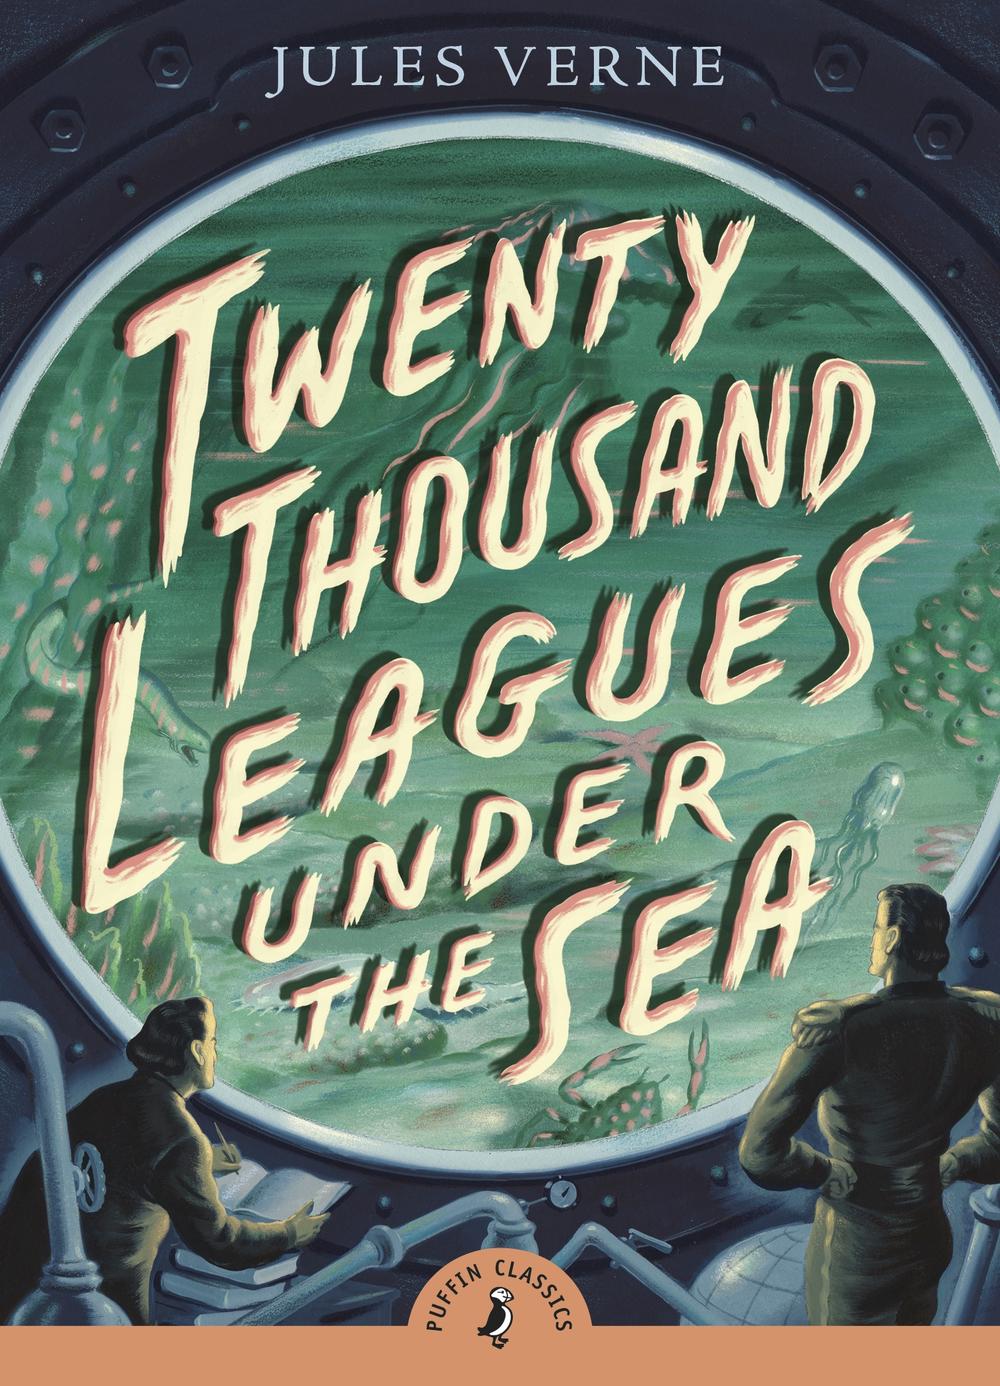 a thousand leagues under the sea